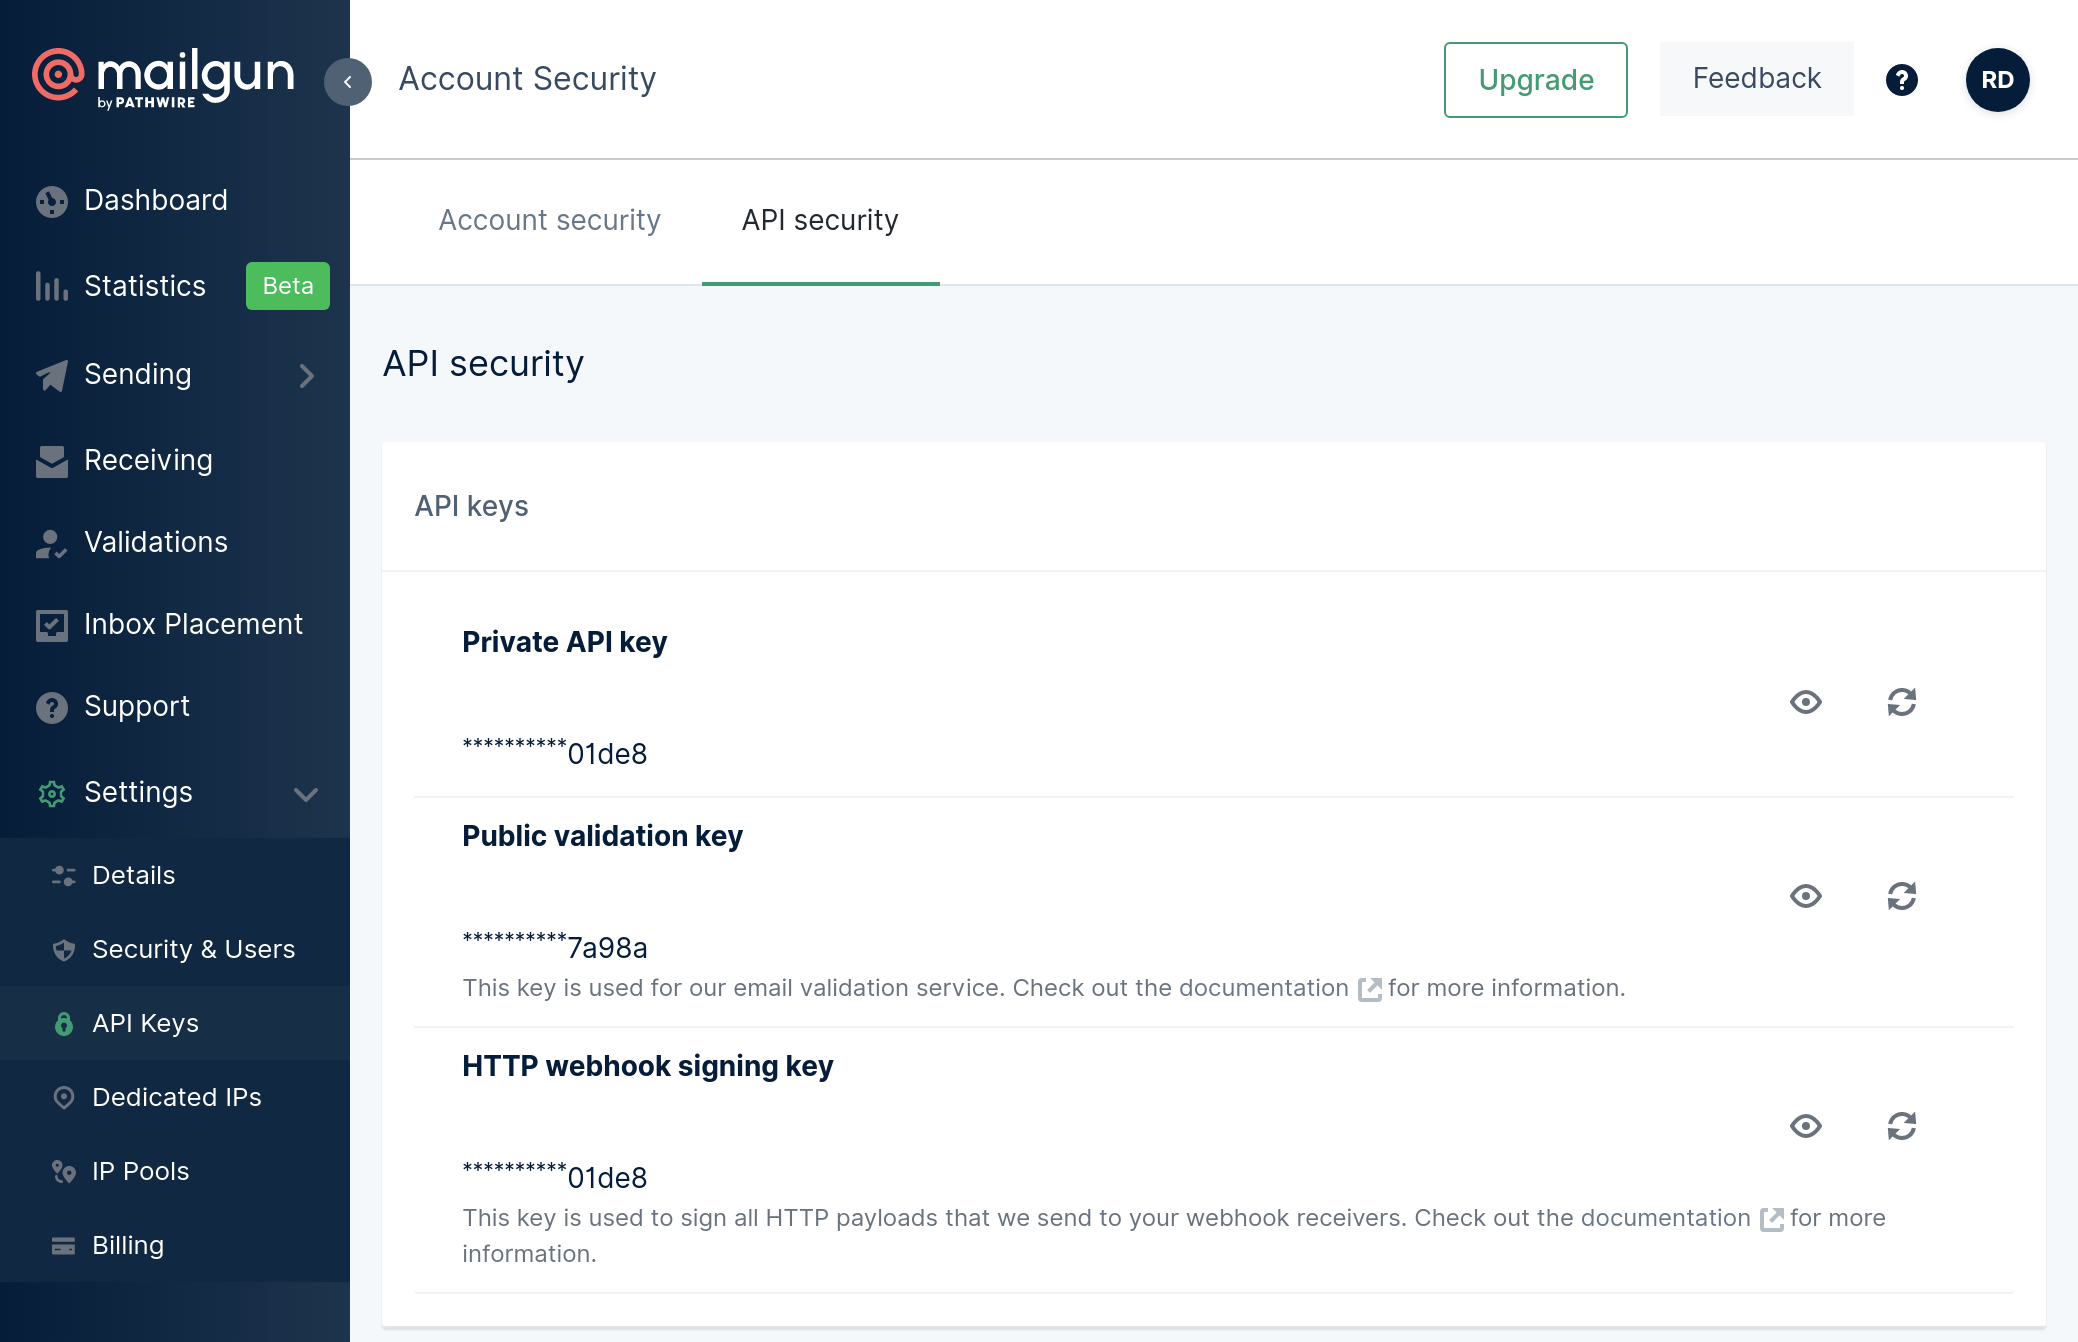 Showing the Mailgun API security screen. The page has a white background with a dark blue left sidebar that contains navigation. The page displays the private API key, the public validation key, and the HTTP web hook signing key.